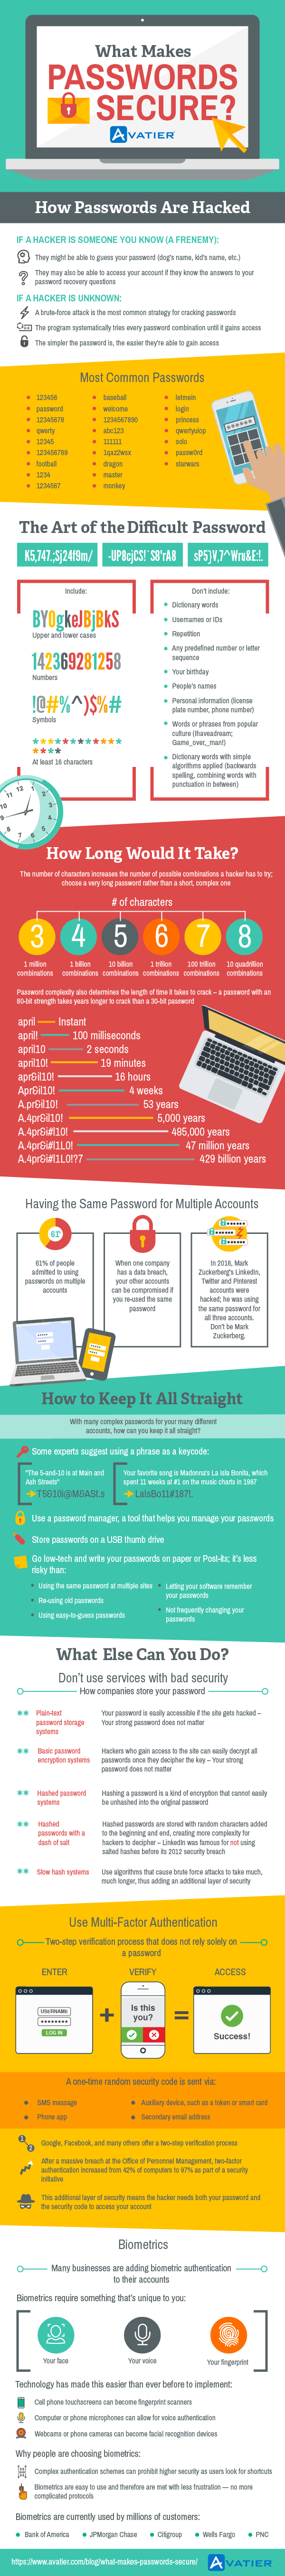 What Makes Passwords Secure